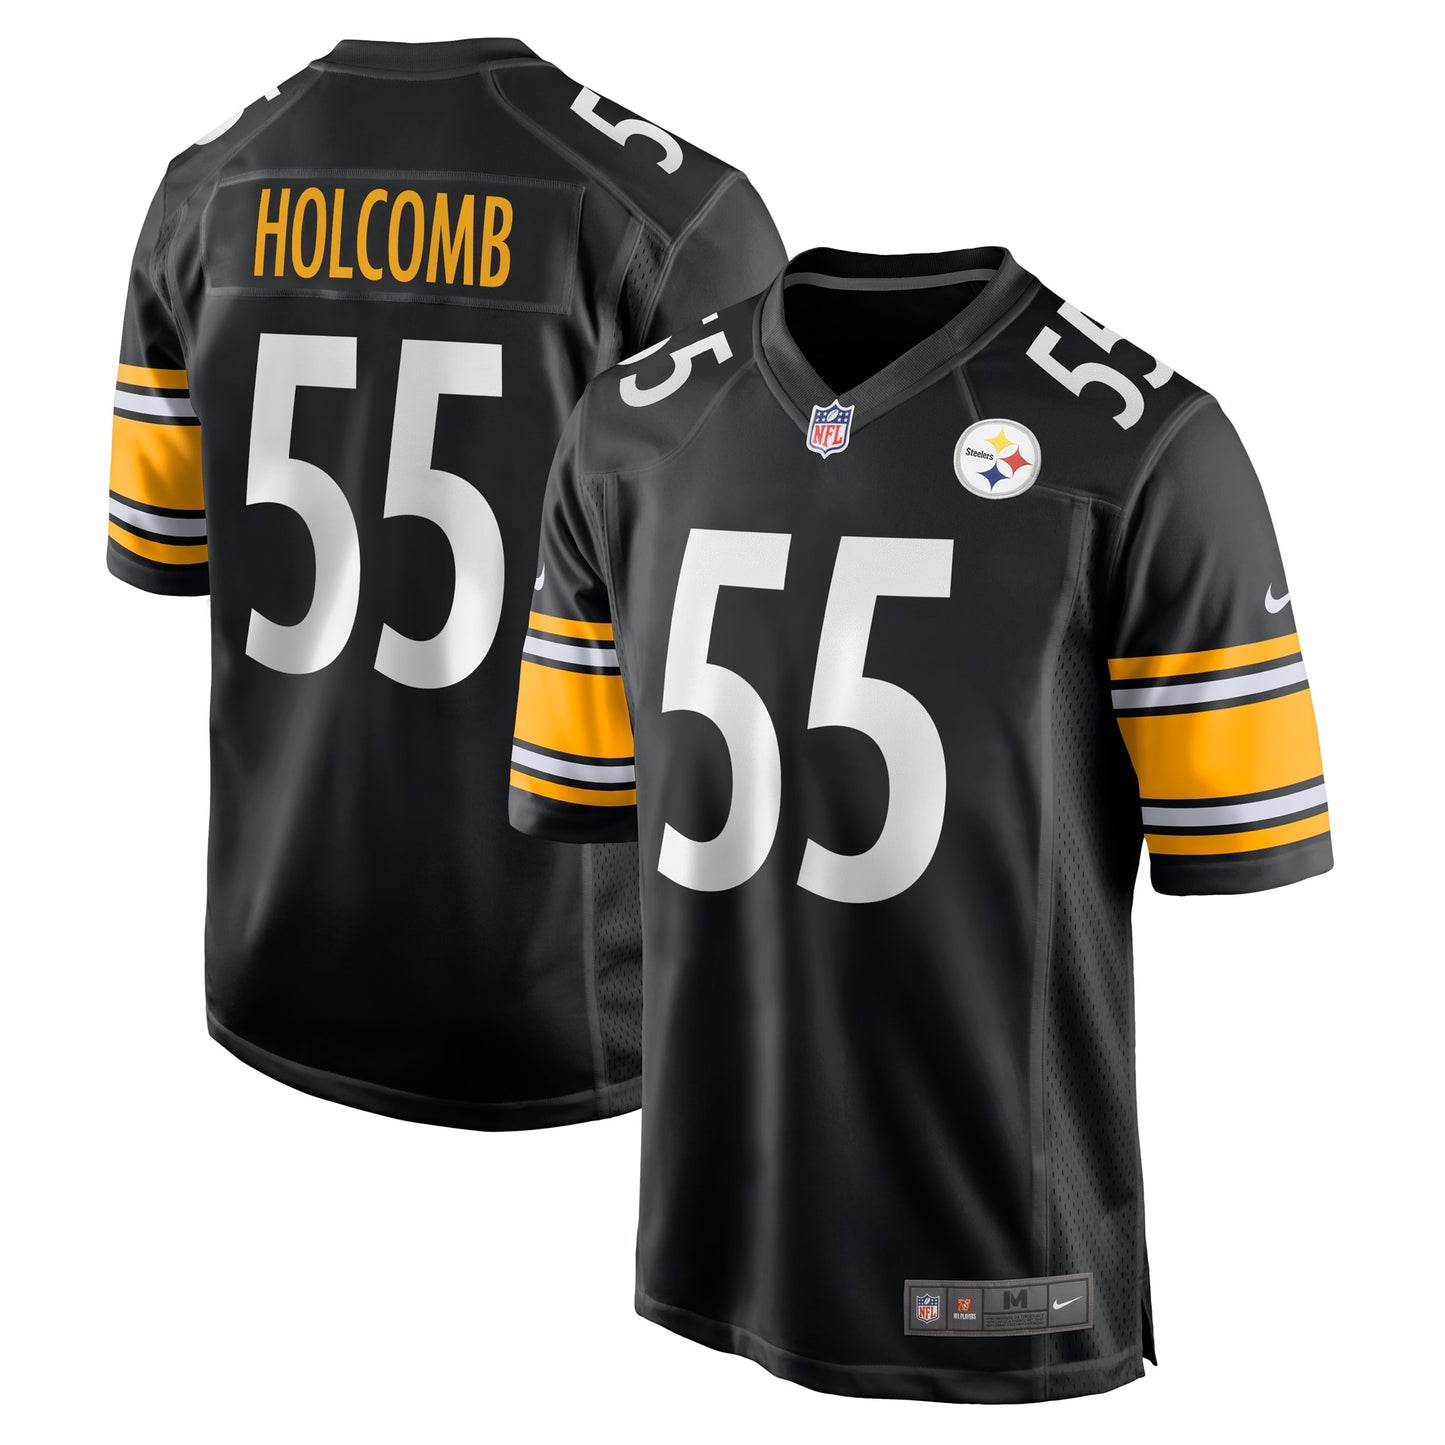 Cole Holcomb Pittsburgh Steelers Nike Game Player Jersey - Black